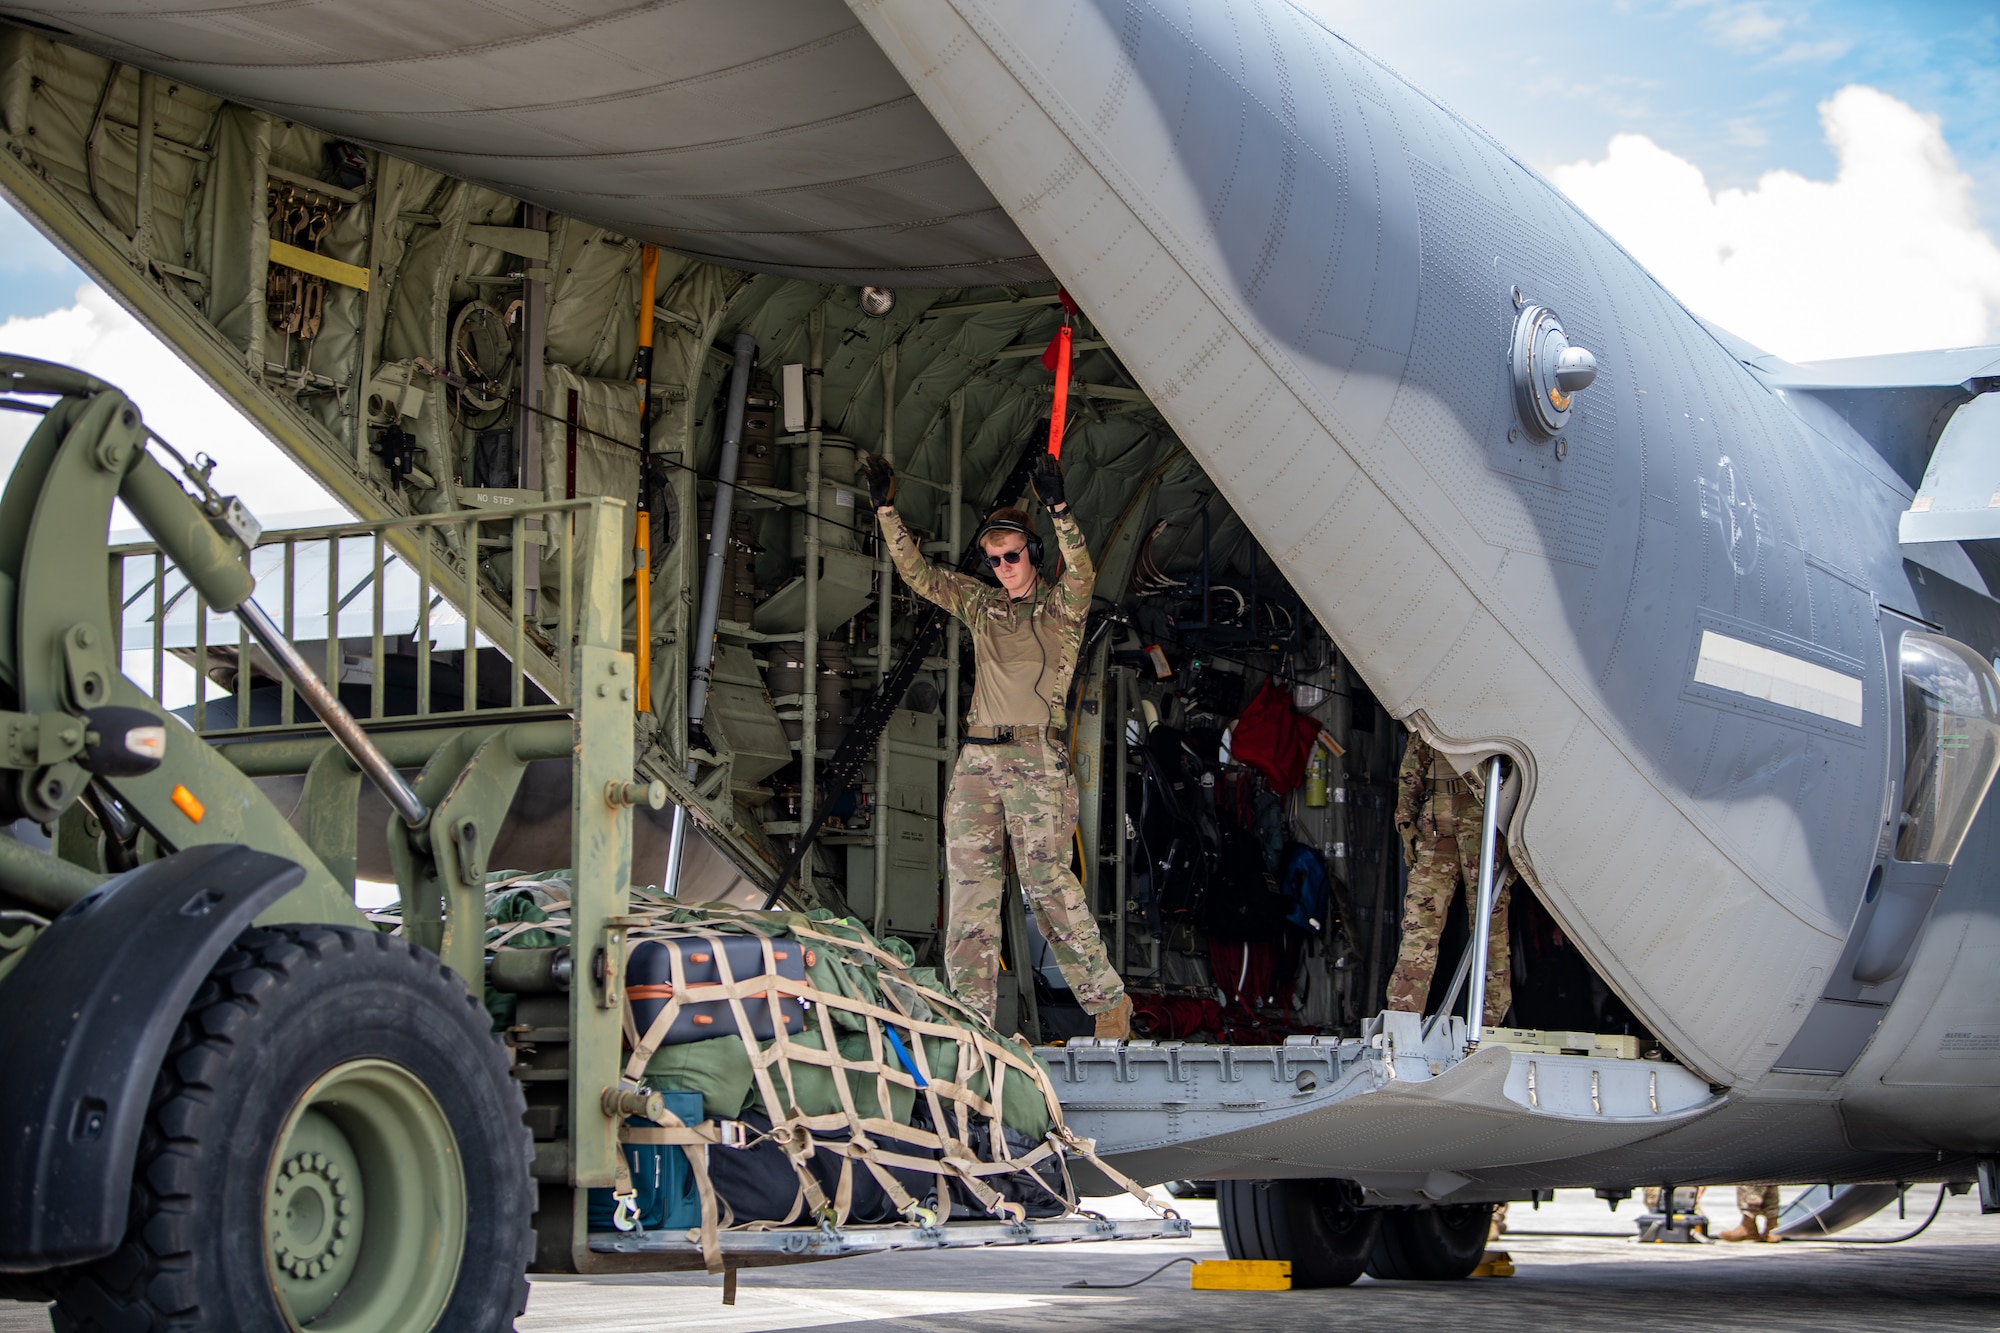 U.S. Air Force Airman 1st Class Blake Daggy, 71st Rescue Squadron loadmaster, directs a forklift to offload cargo during exercise Ready Tiger 24-1 at Savannah Air National Guard Base, Georgia, April 10, 2024. The 71st RQS provided essential airlift support for transporting cargo and personnel and responded to combat search and rescue scenarios throughout the exercise. During Ready Tiger 24-1, the 23rd Wing will be evaluated on the integration of Air Force Force Generation principles such as Agile Combat Employment, integrated combat turns, forward aerial refueling points, multi-capable Airmen, and combat search and rescue capabilities. (U.S. Air Force photo by Senior Airman Courtney Sebastianelli)